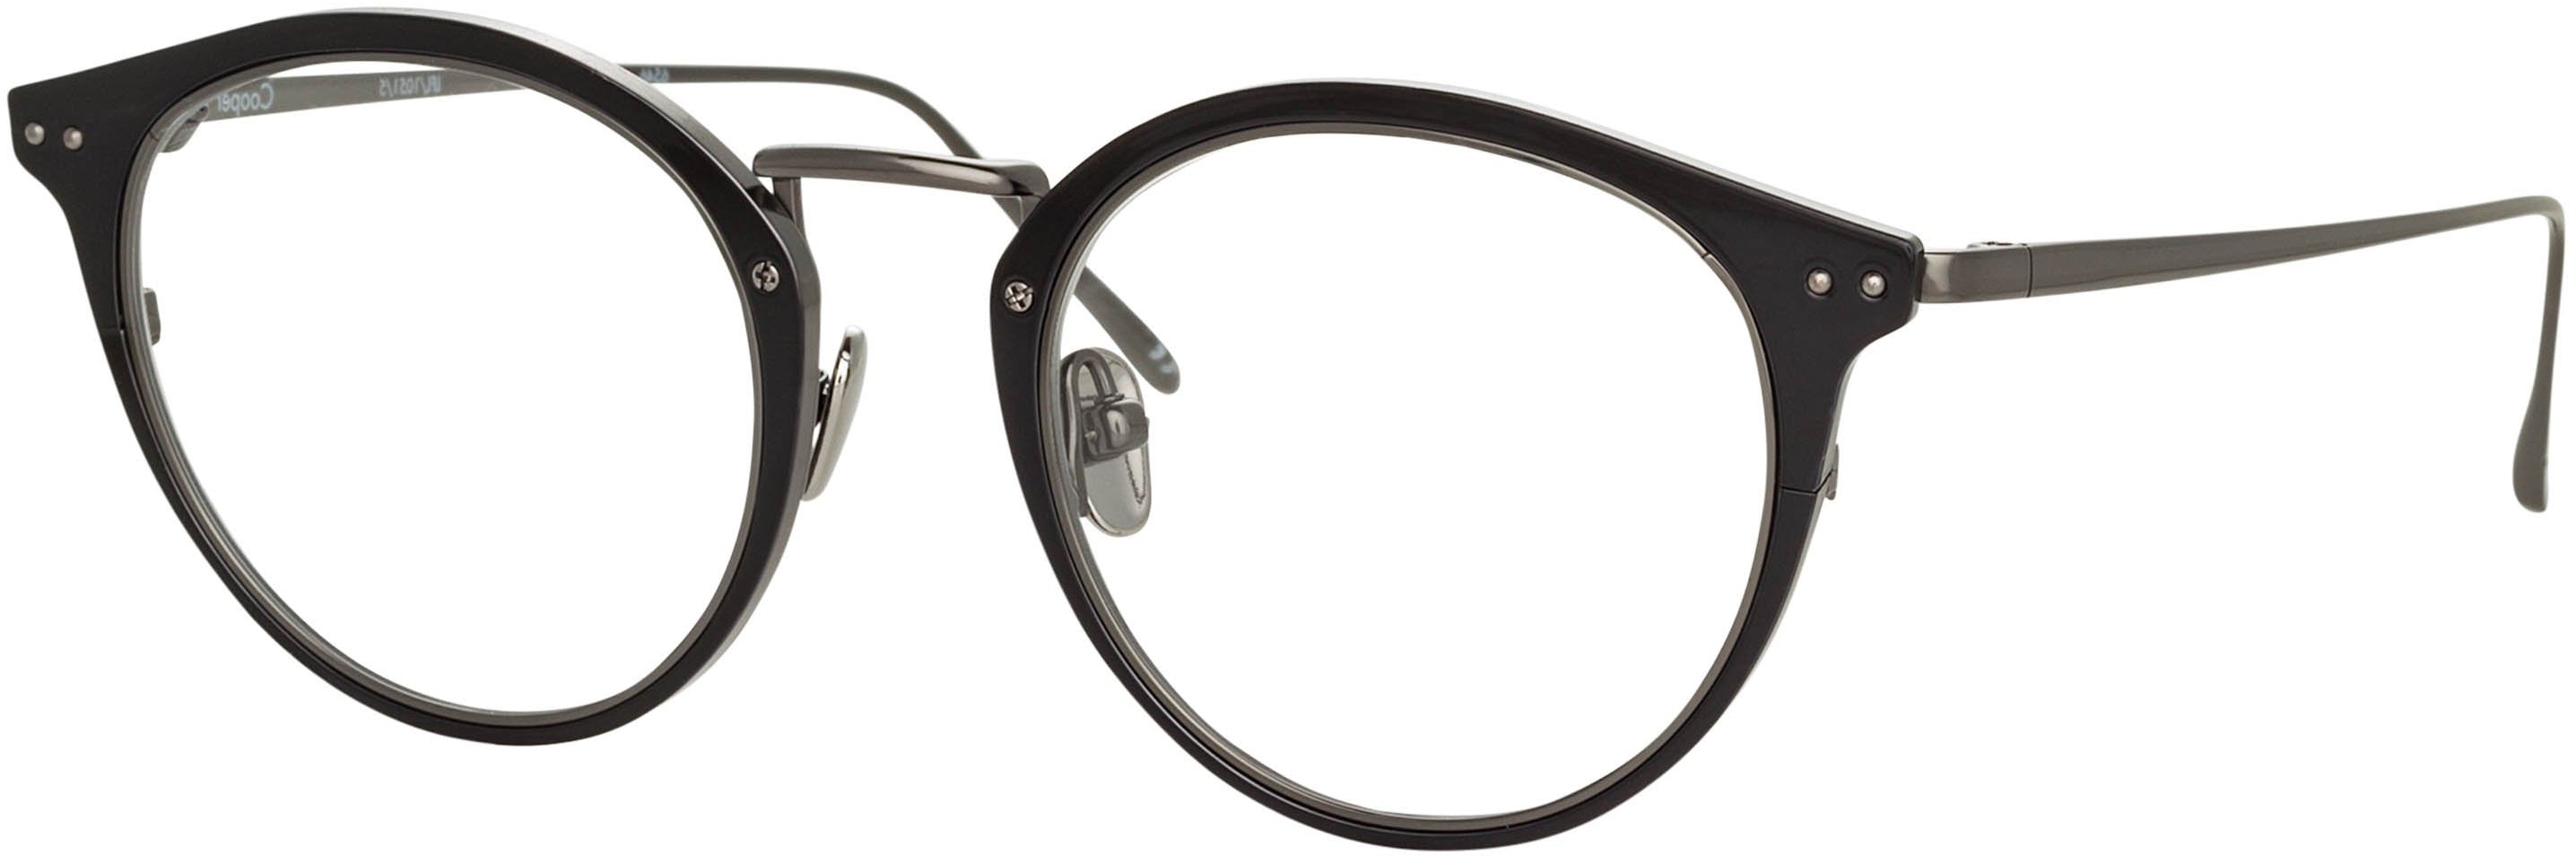 Color_LFL1051C5OPT - Cooper Oval Optical Frame in Black and Nickel